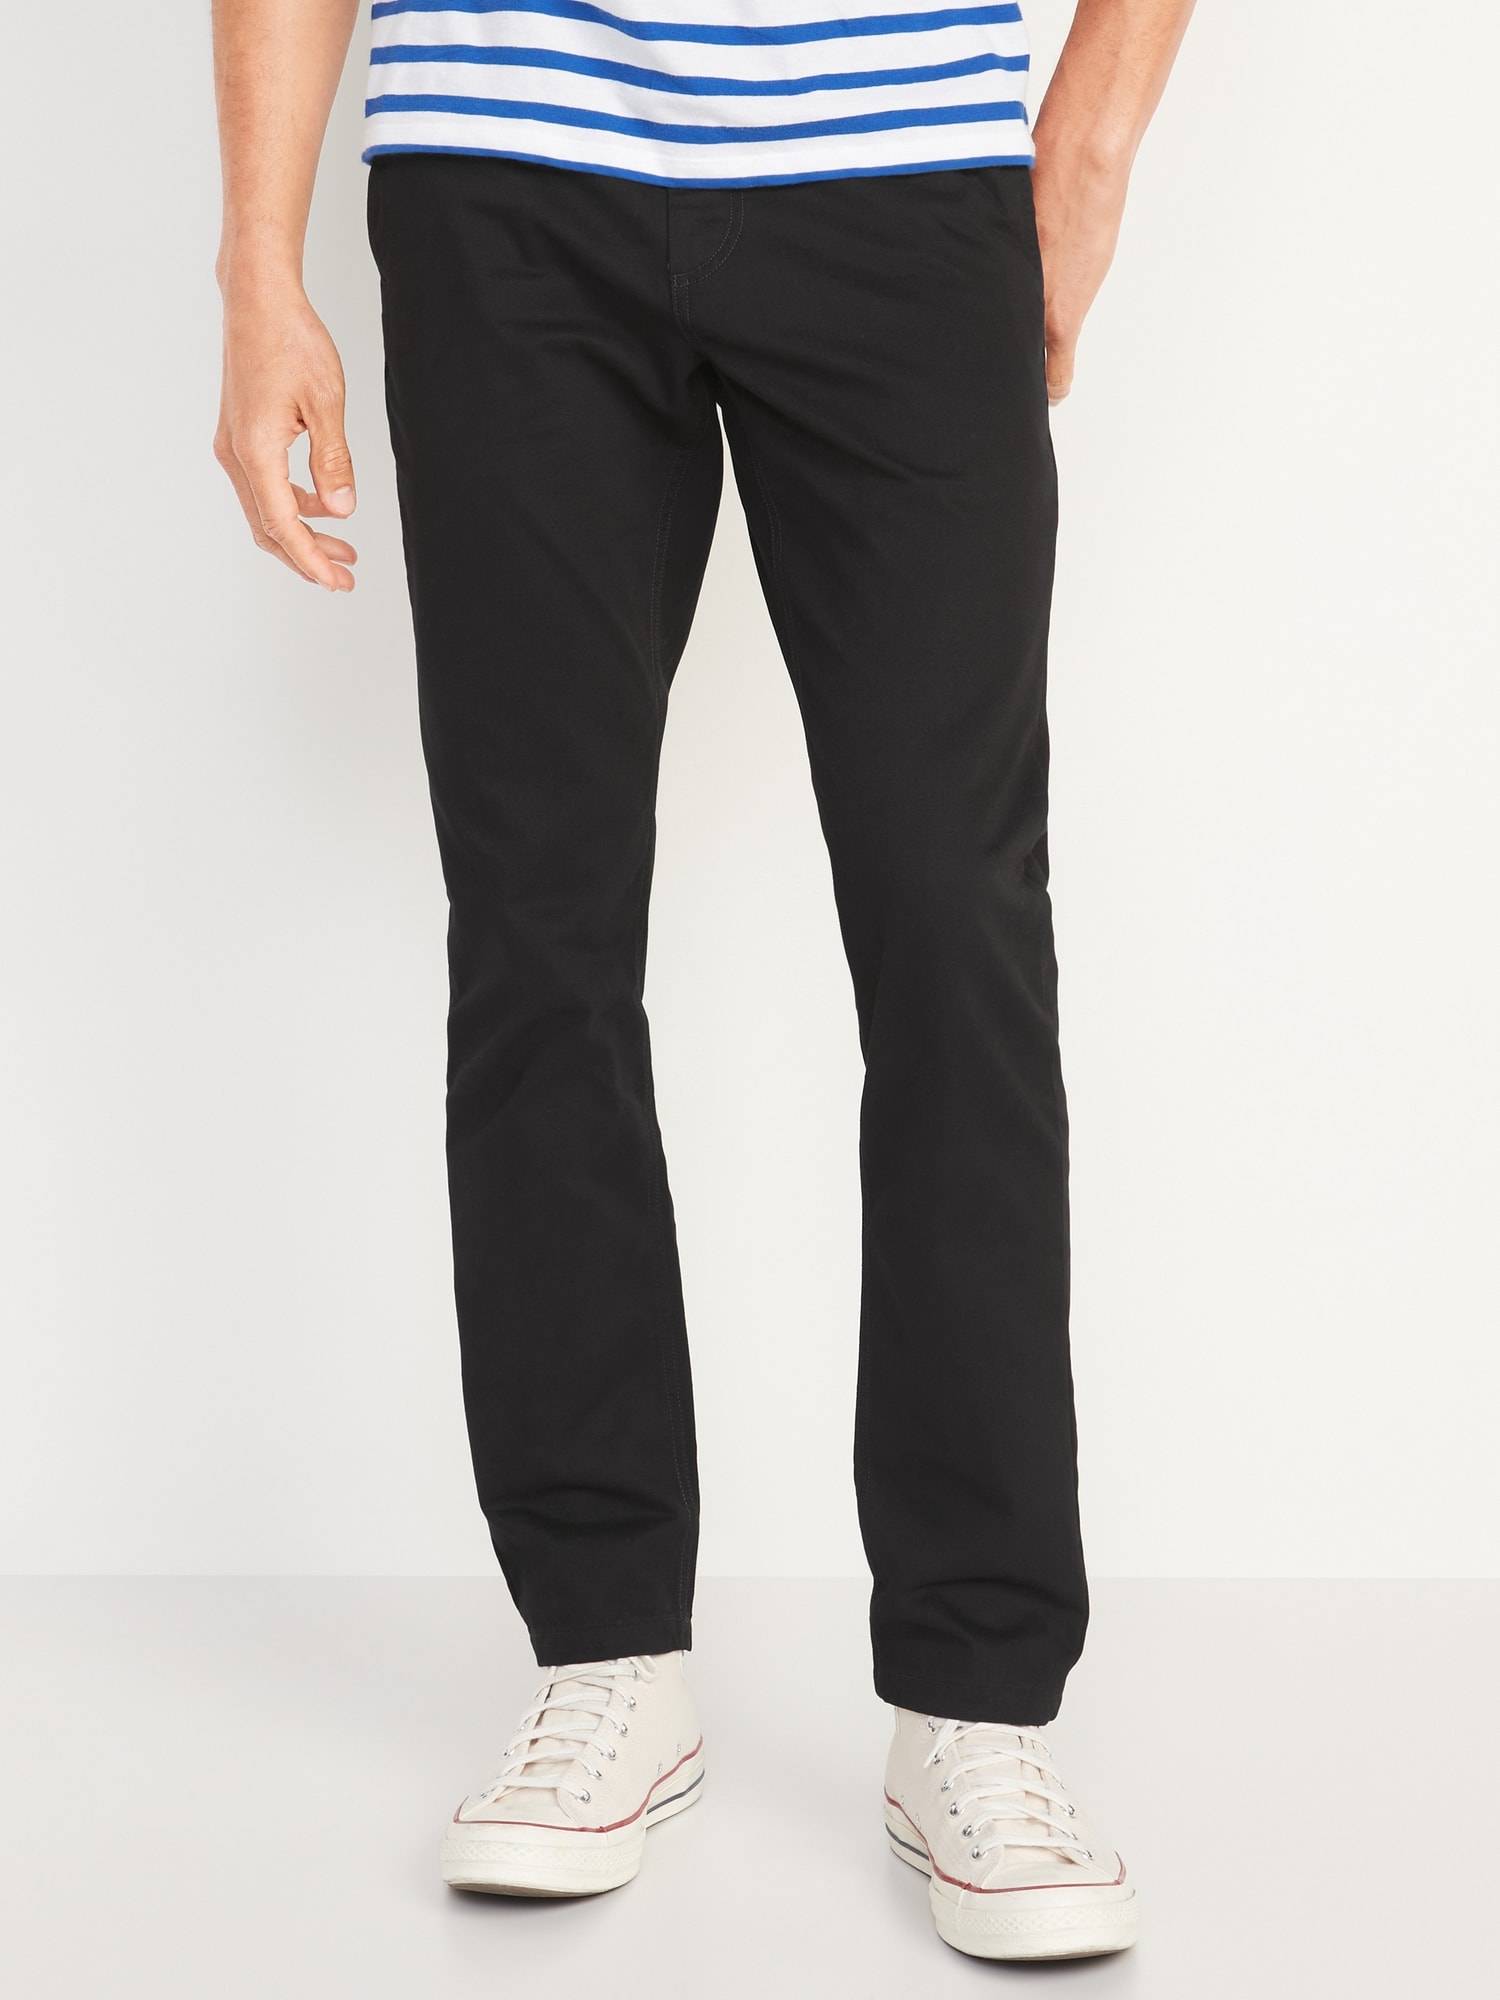 Slim Uniform Non-Stretch Chino Pants for Men | Old Navy